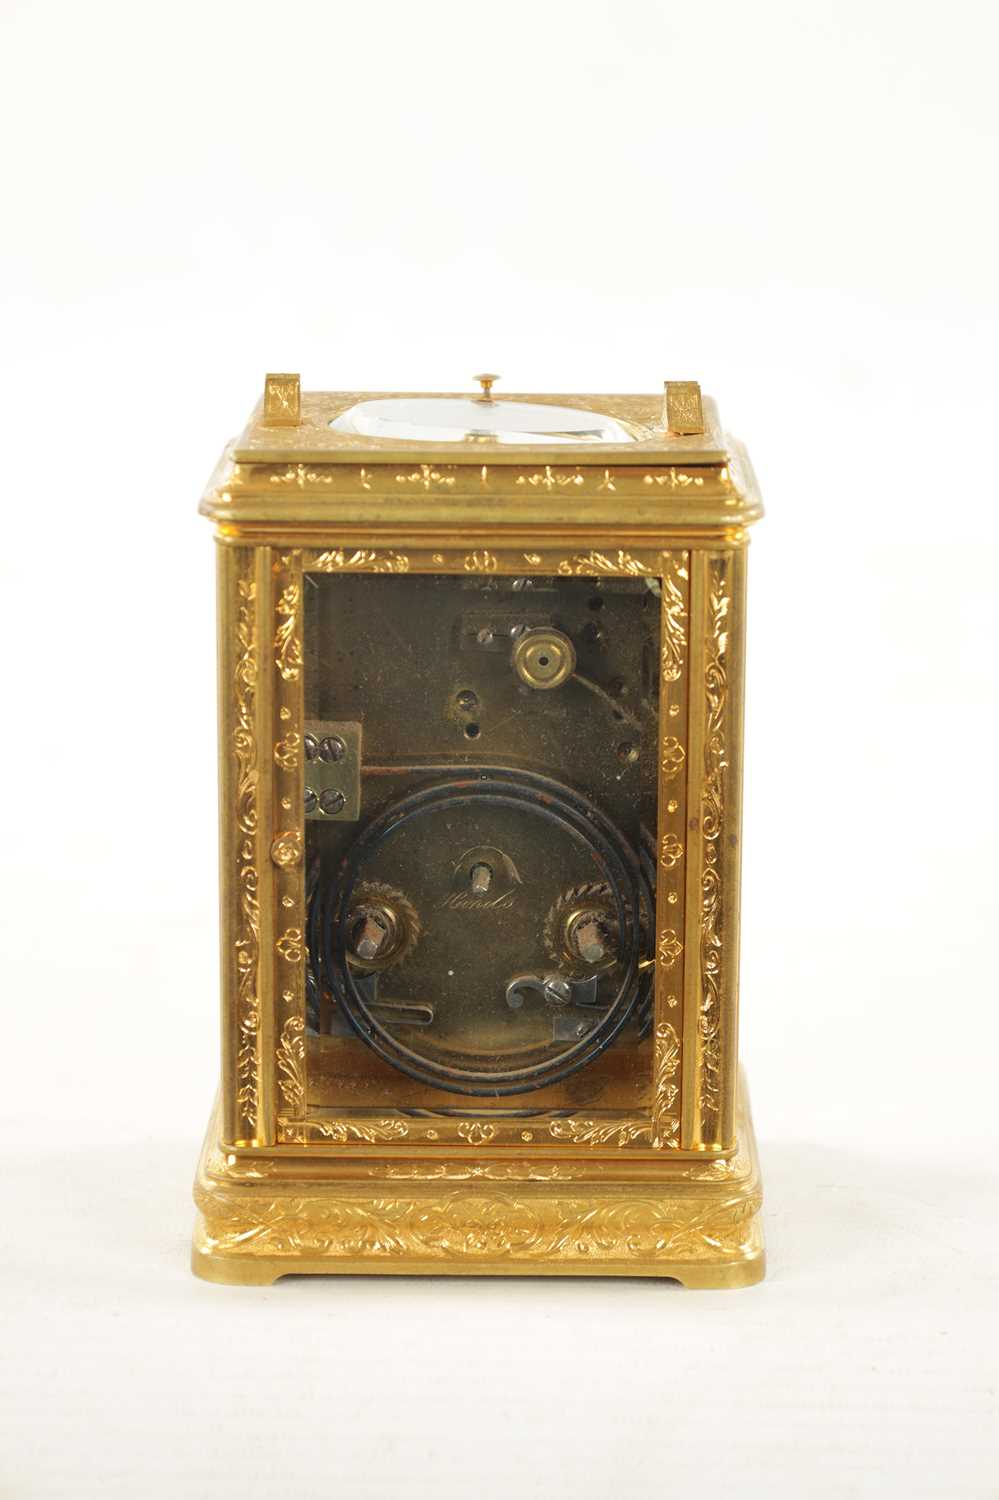 A LATE 19TH CENTURY FRENCH CHAMPLEVE ENAMEL AND GILT BRASS ENGRAVED REPEATING CARRIAGE CLOCK - Image 6 of 13